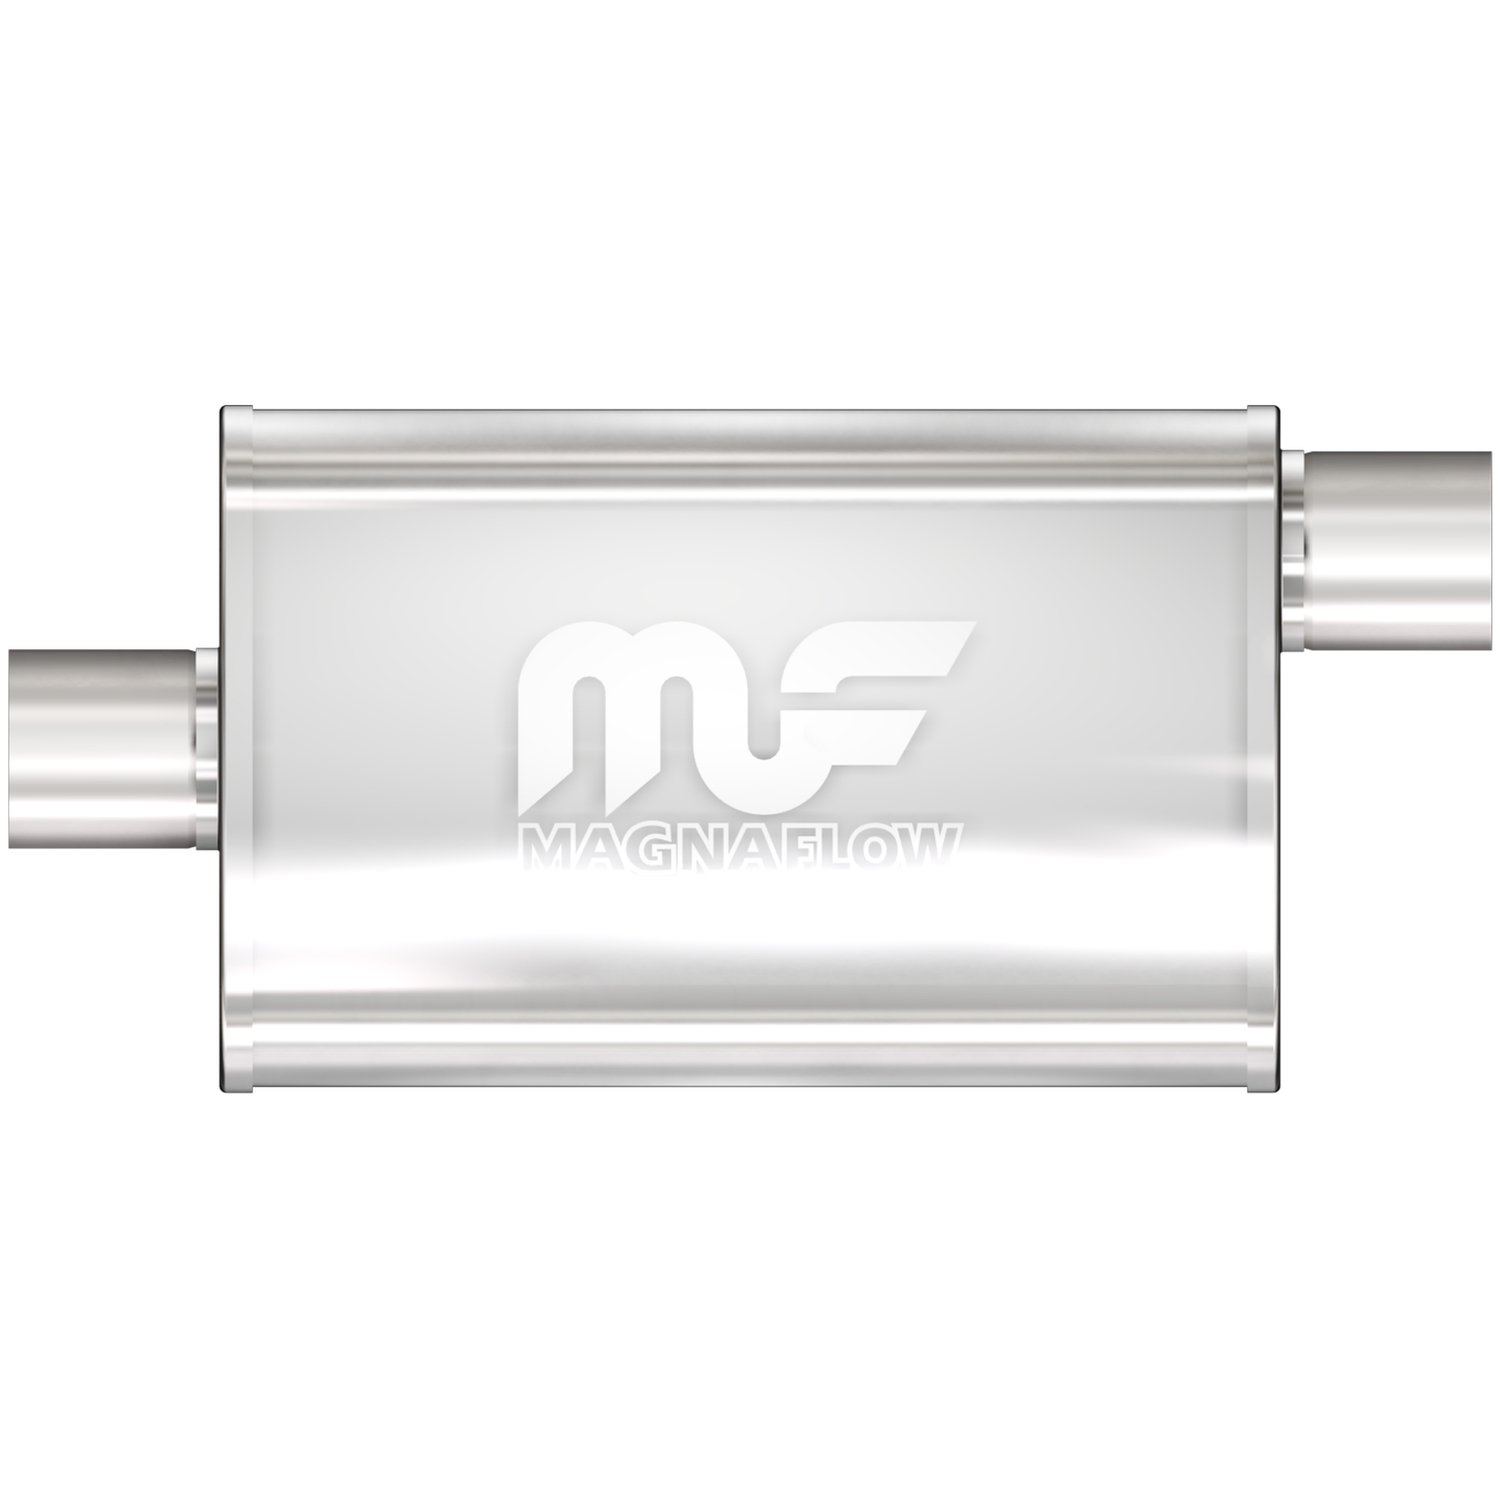 4" x 9" Oval Muffler Offset In/Center Out: 2.5"/2.5" Body Length: 11" Overall Length: 17" Core Size: 2.5" Satin Finish